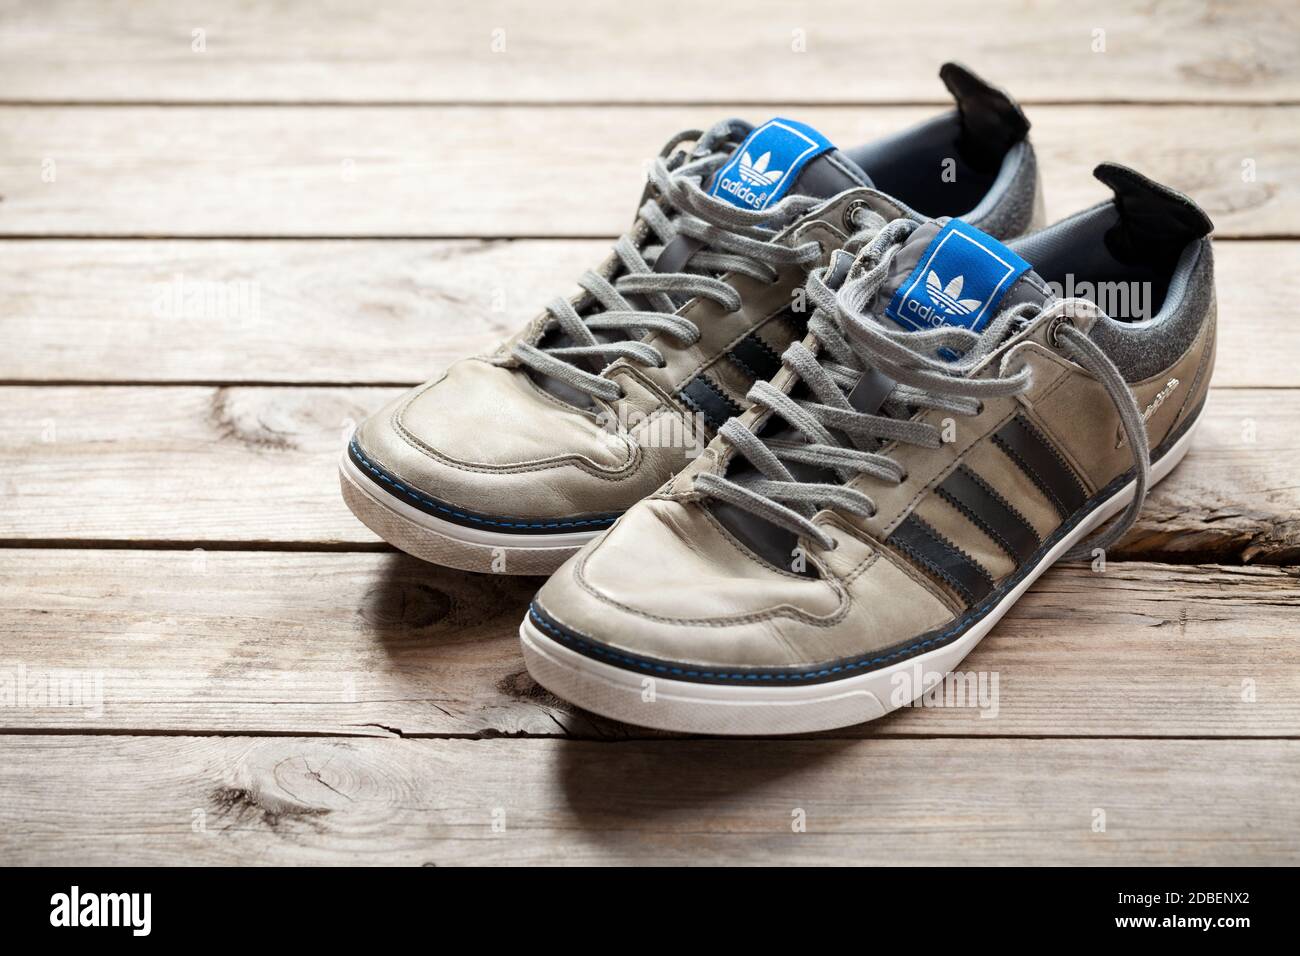 Adidas Boots High Resolution Stock Photography and Images - Alamy